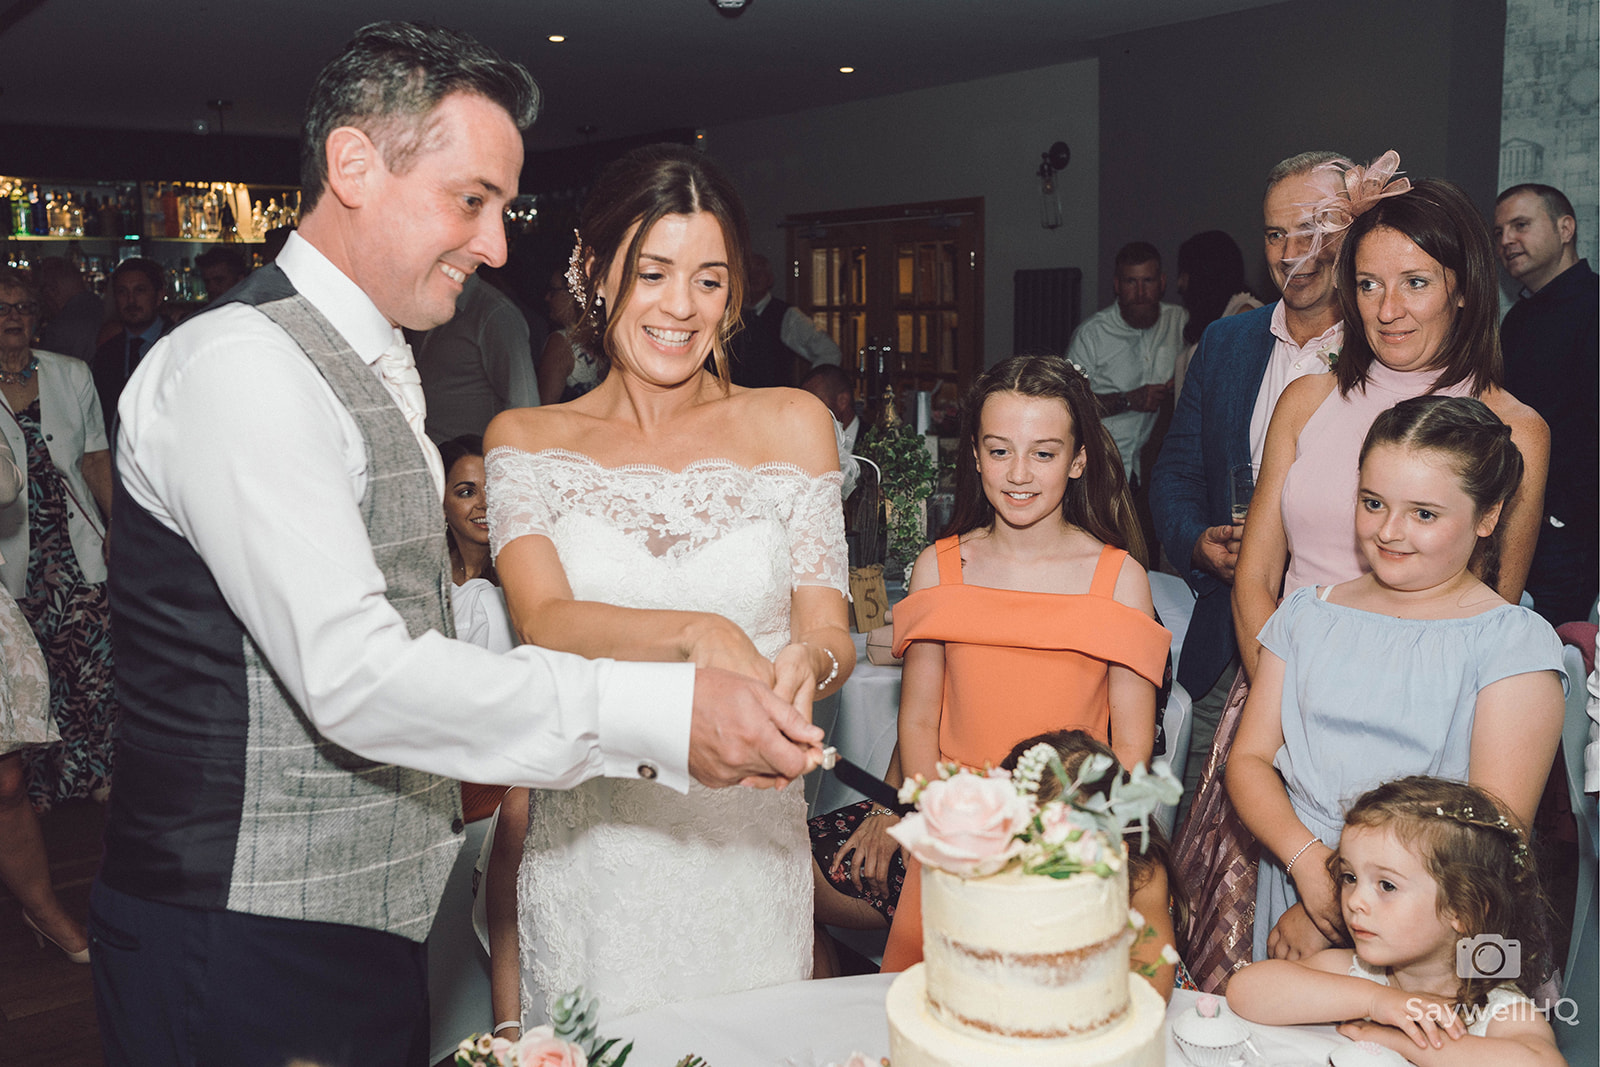 The Chequers Inn Wedding Photography - the bride and groom cutting the wedding cake in front of the wedding guests